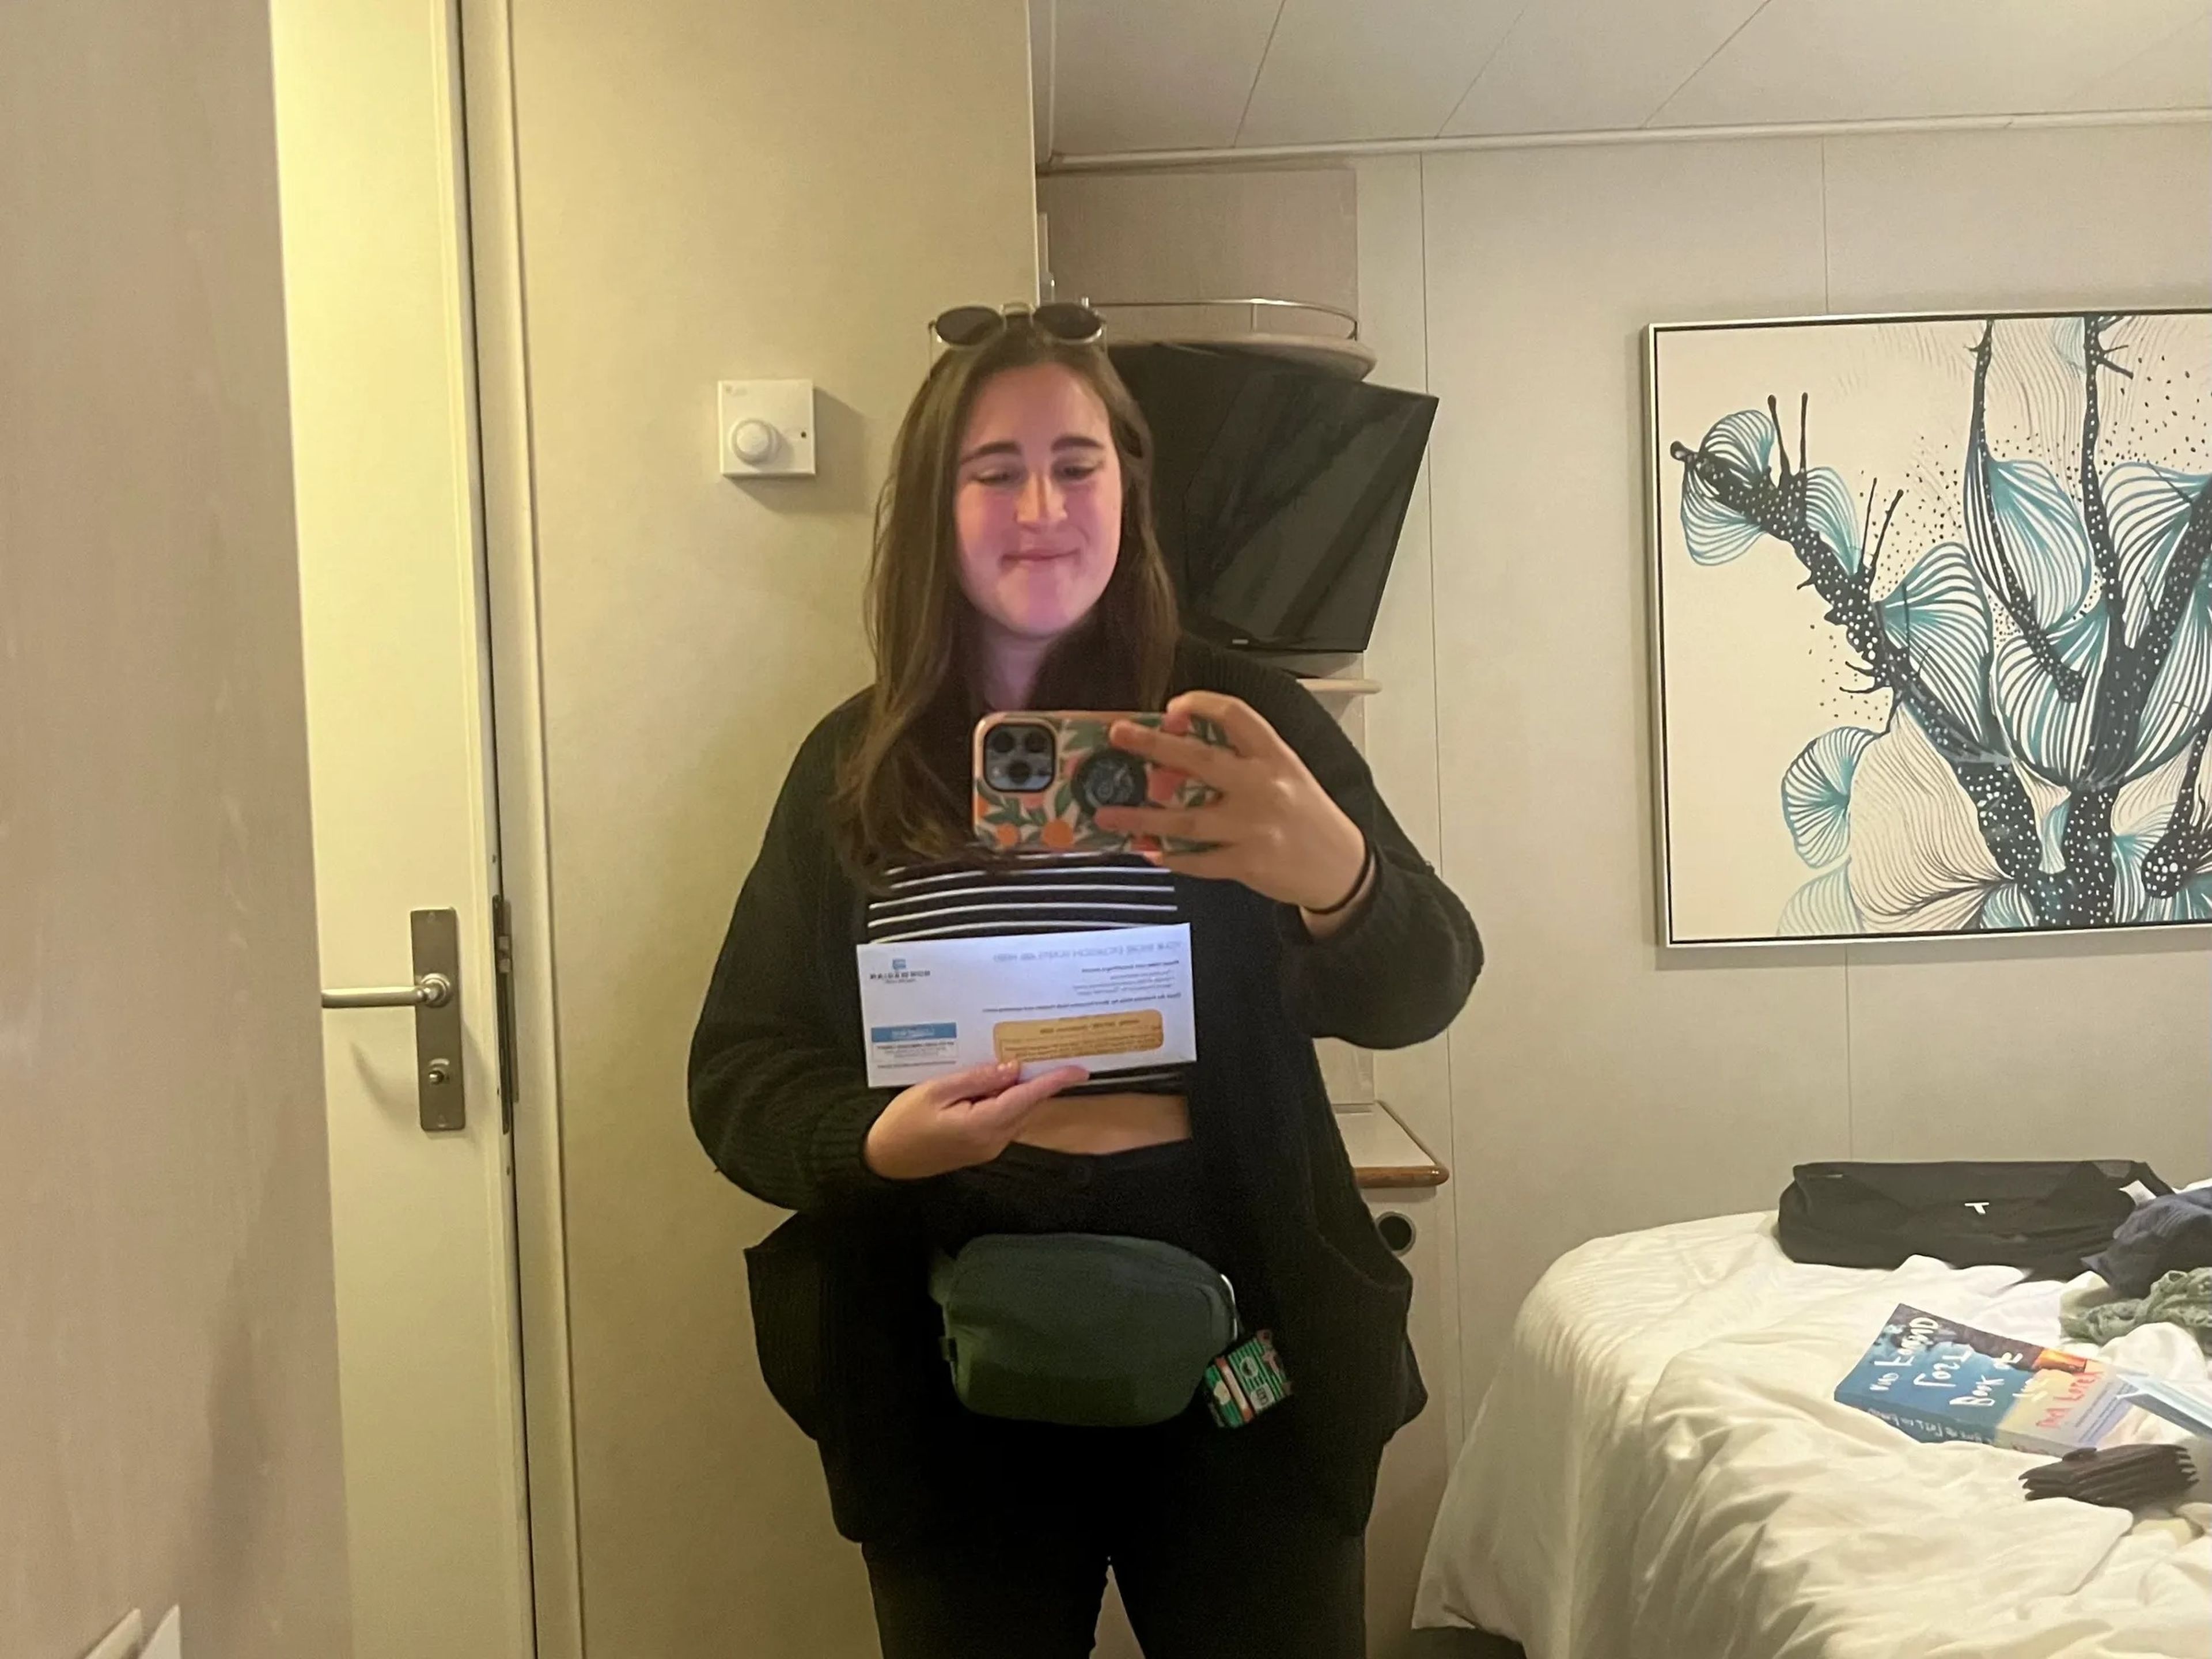 A picture of the author in the mirror holding excursion tickets.